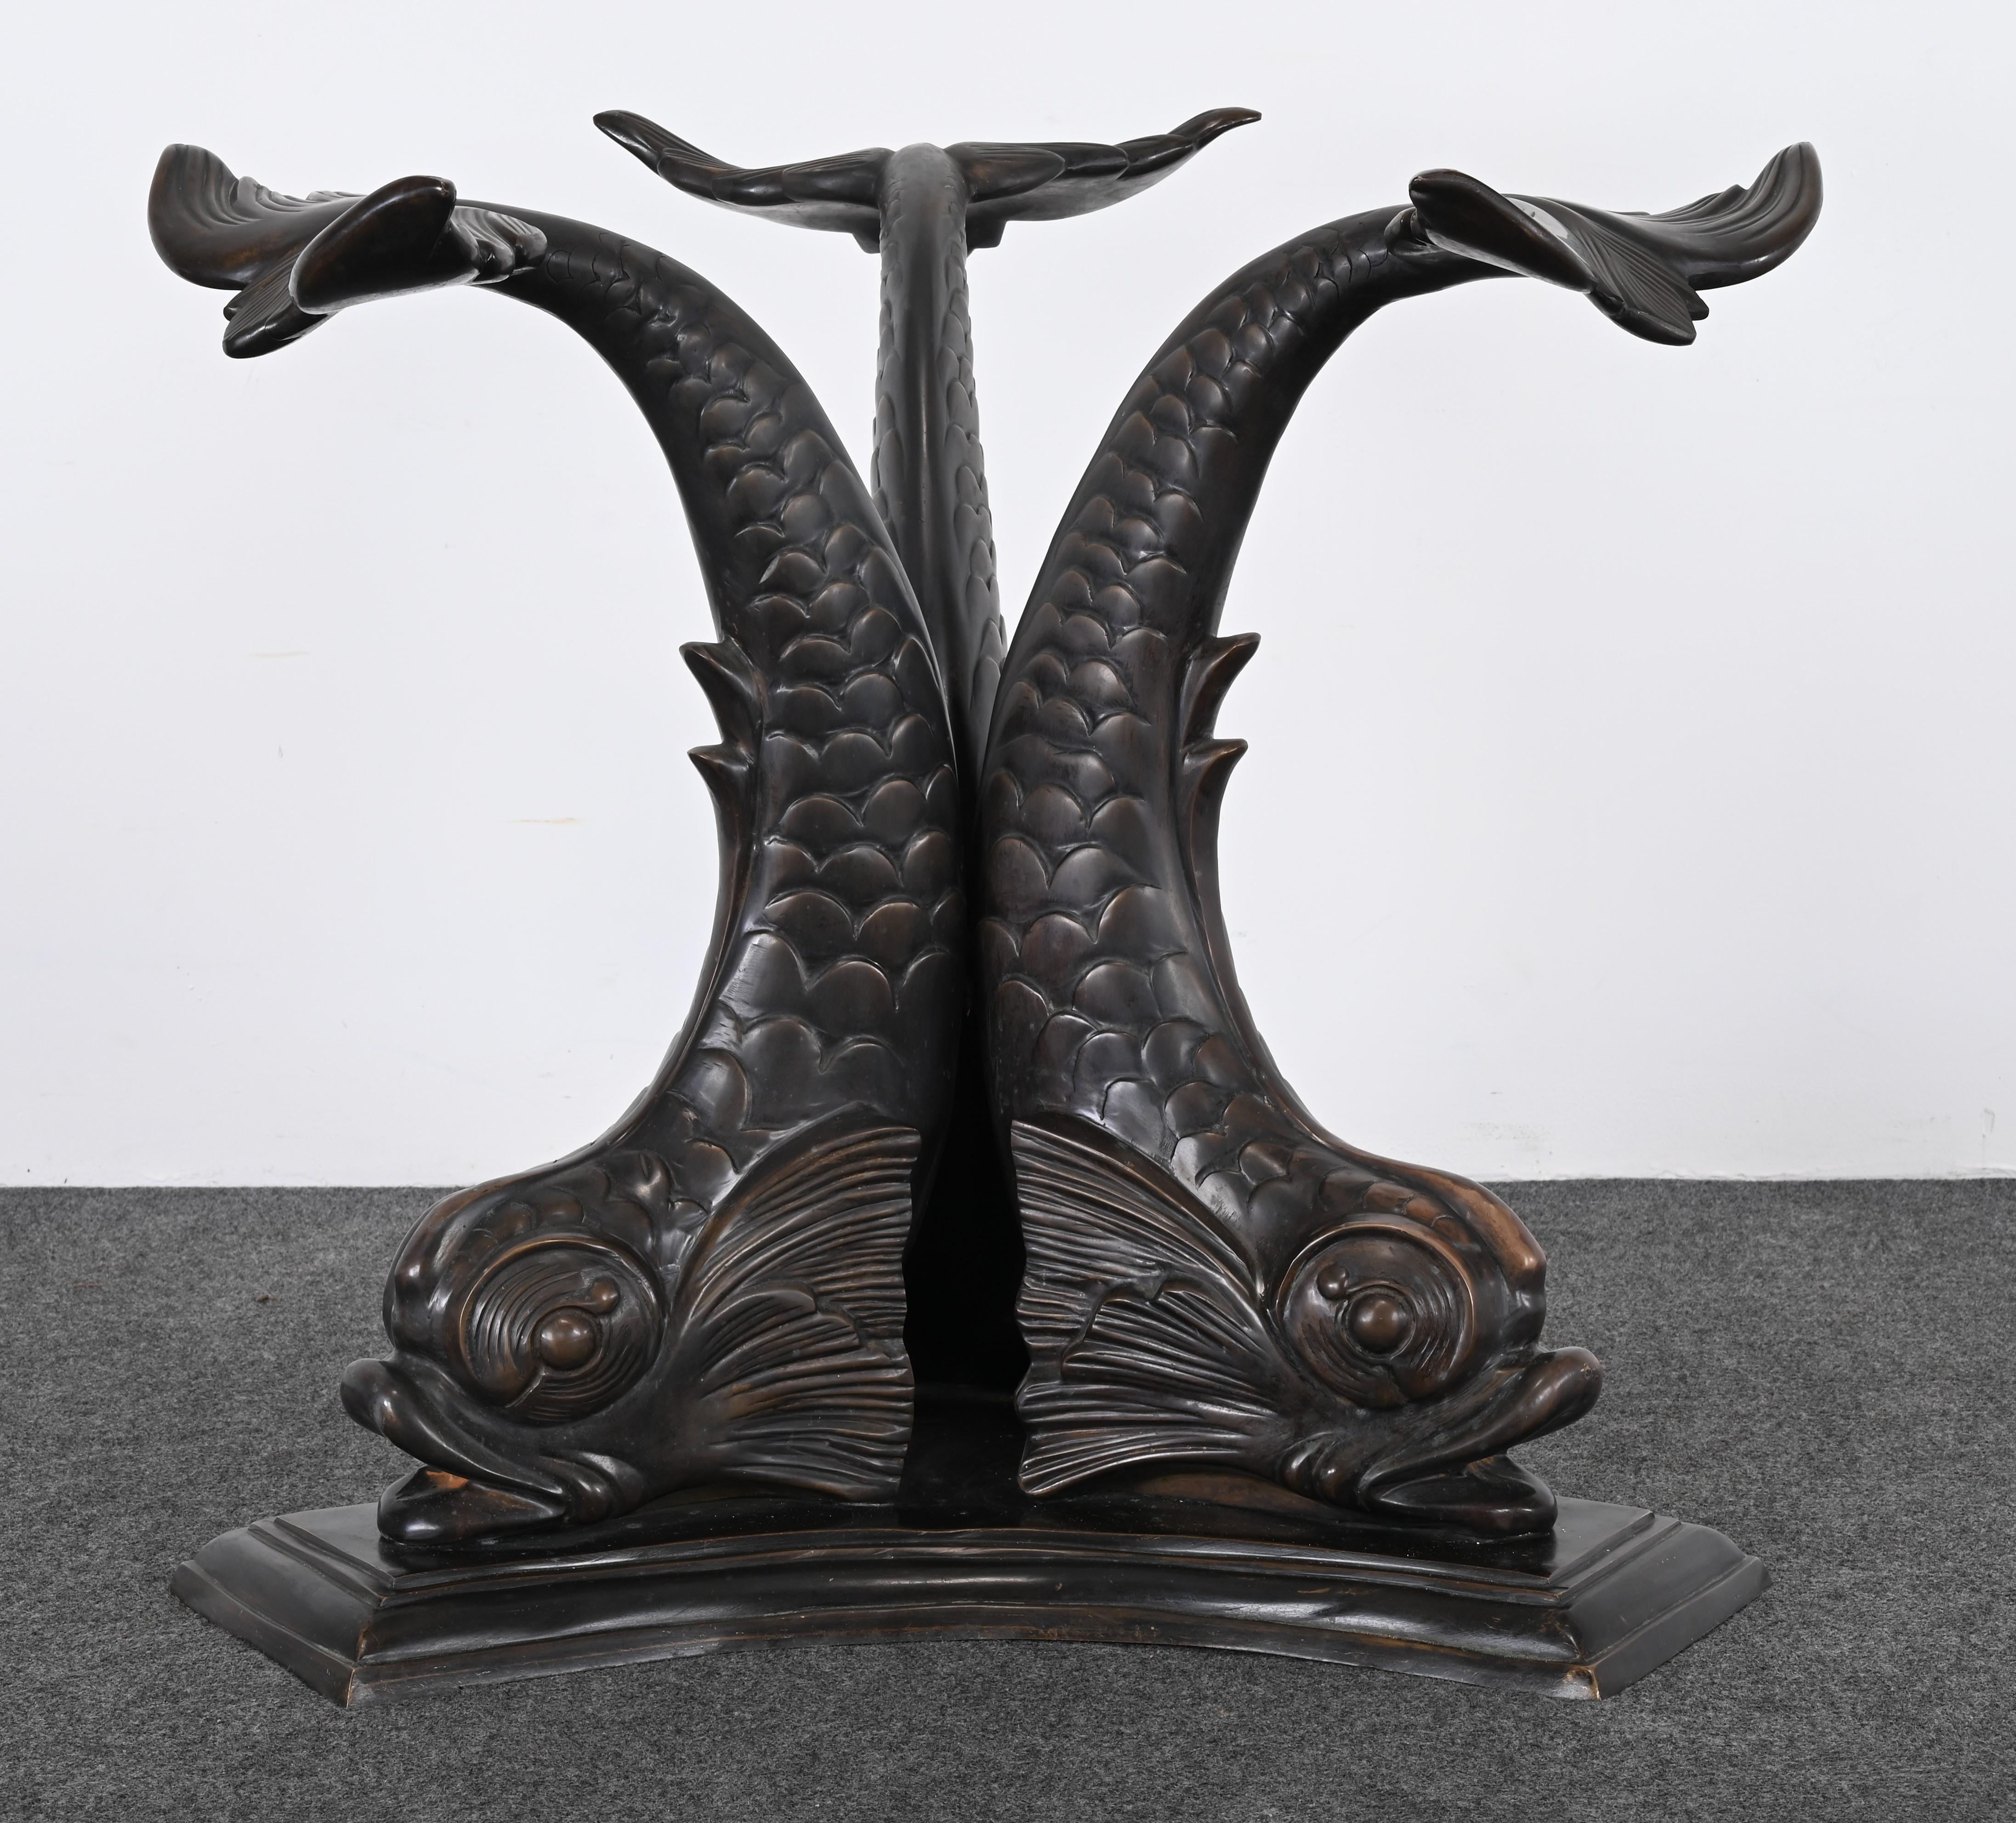 A fabulous bronze center table or dining table by Maitland Smith. The company is known for creating exquisite and unique decorative accessories, lighting, and accent furniture. This table would work well in any traditional or contemporary setting.